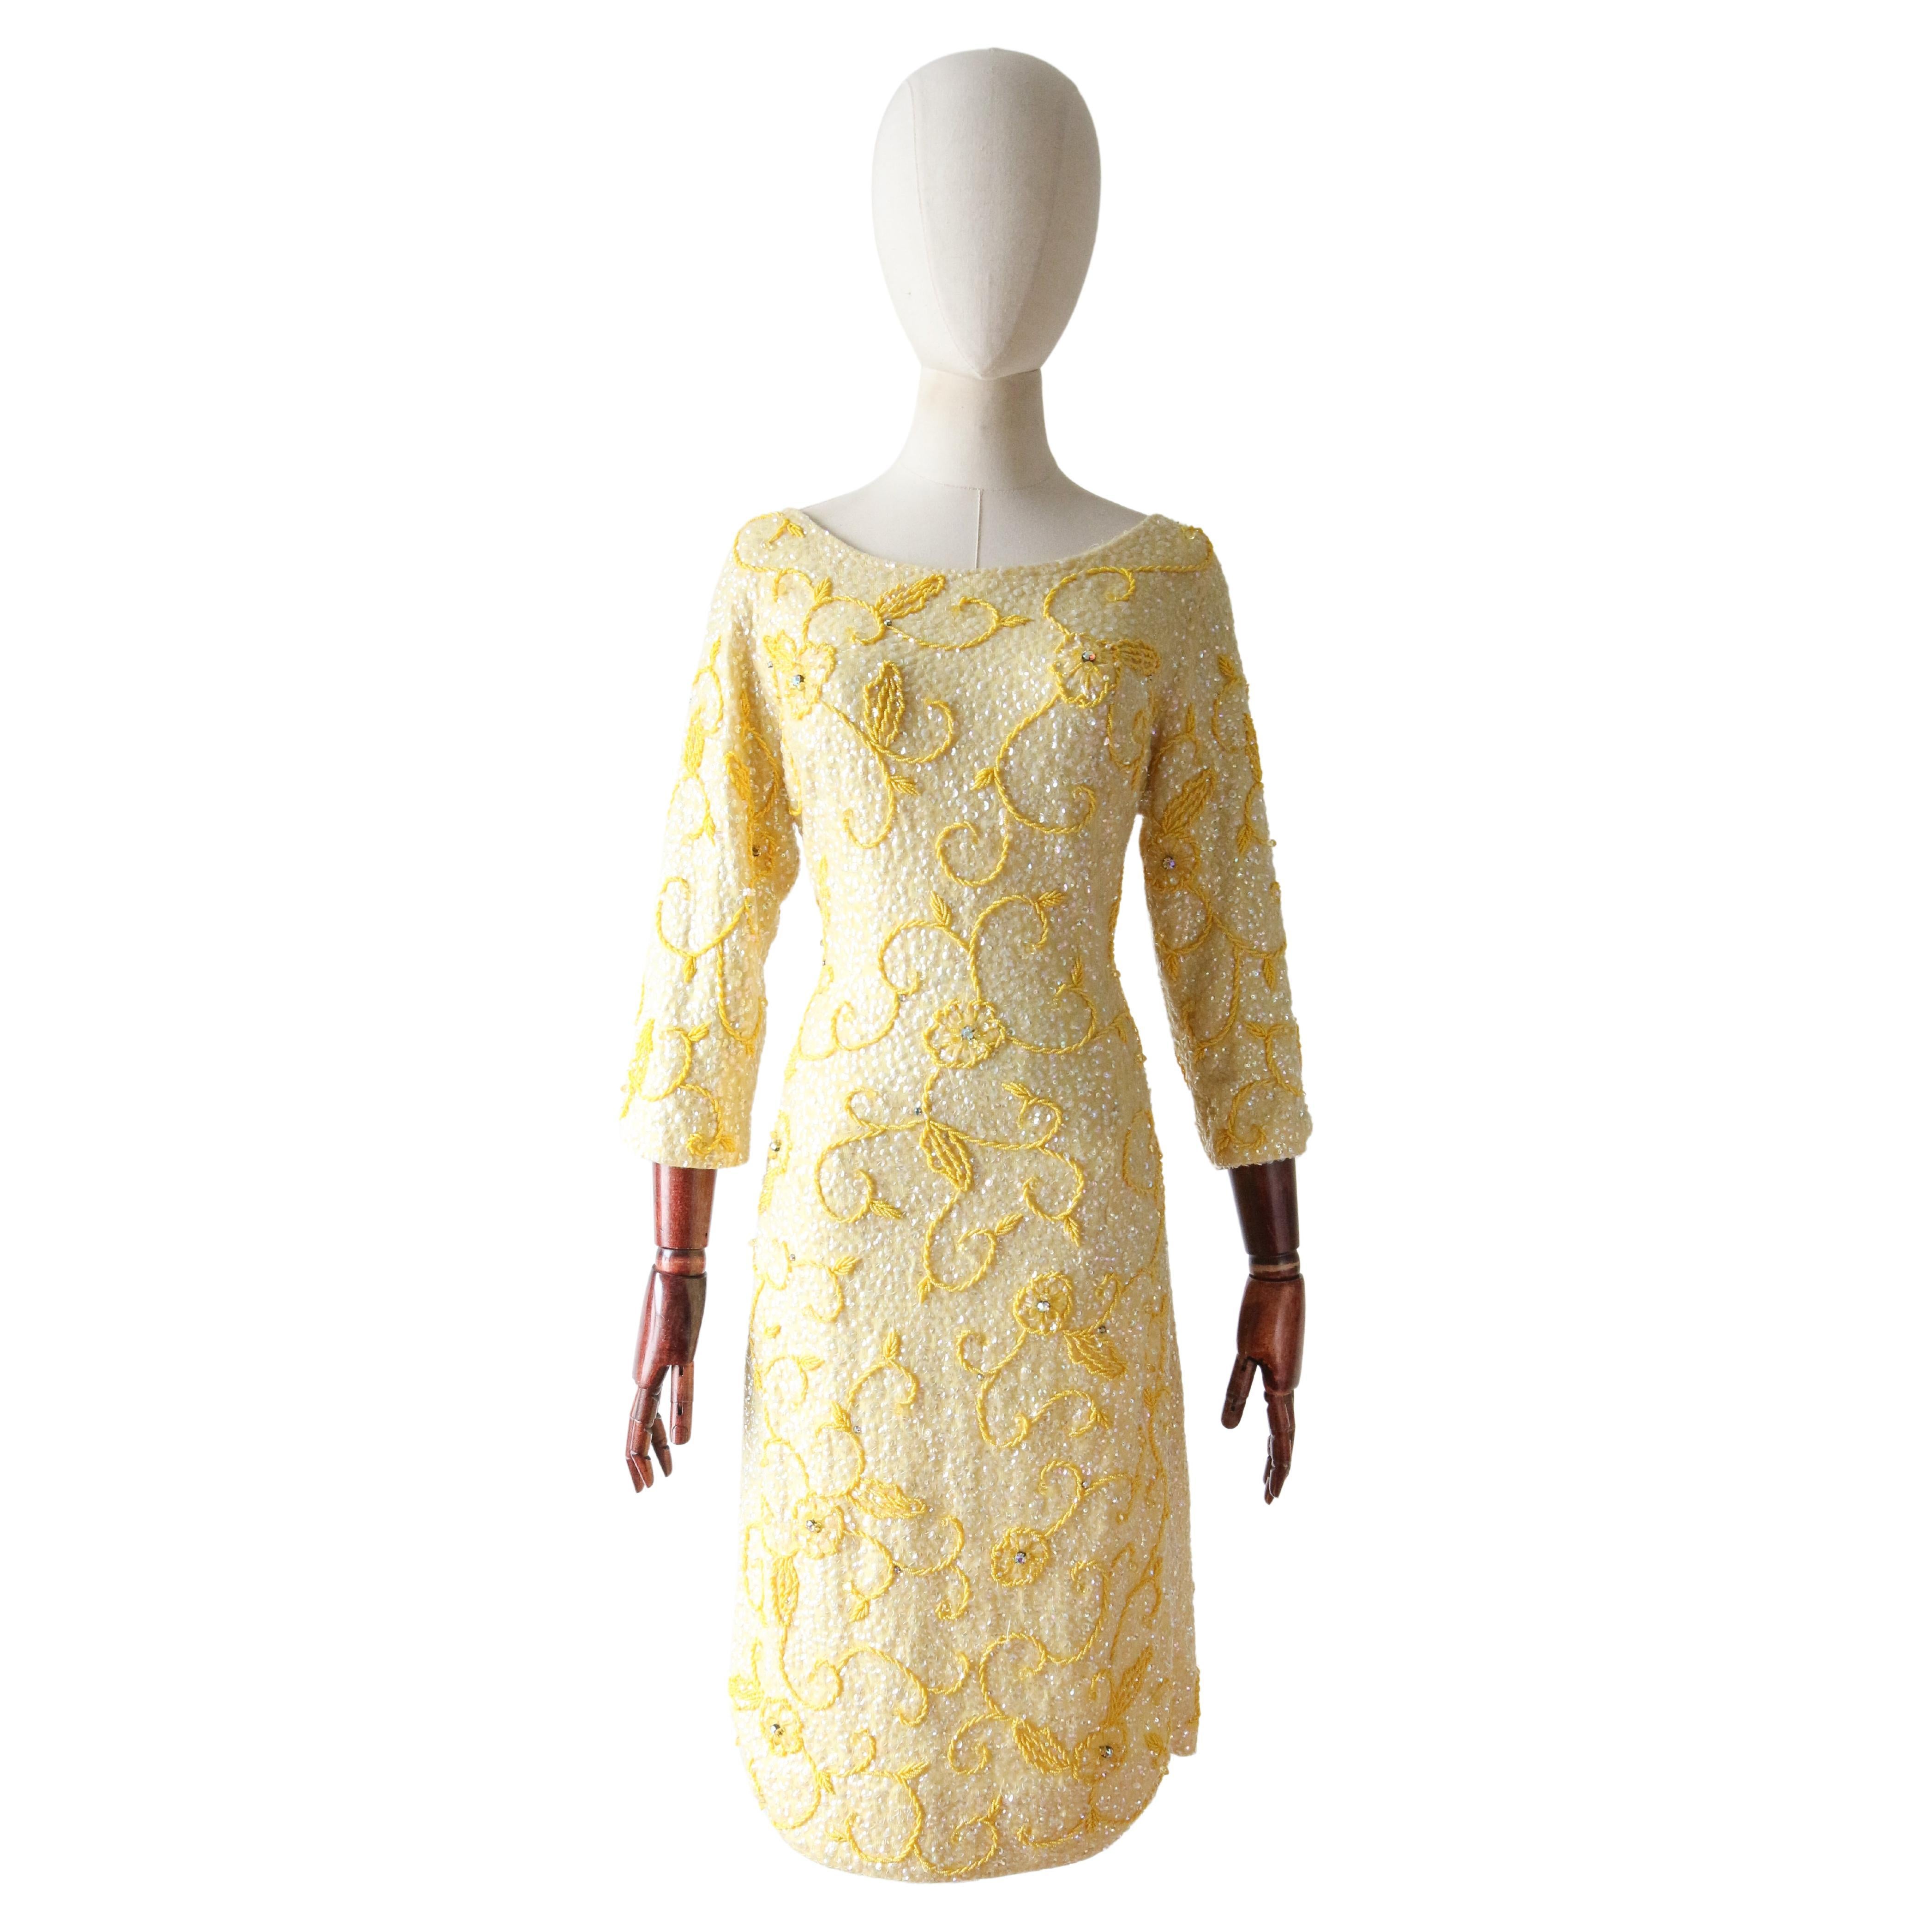 Vintage 1960's yellow sequin beaded cocktail dress wiggle dress UK 12 US 8 